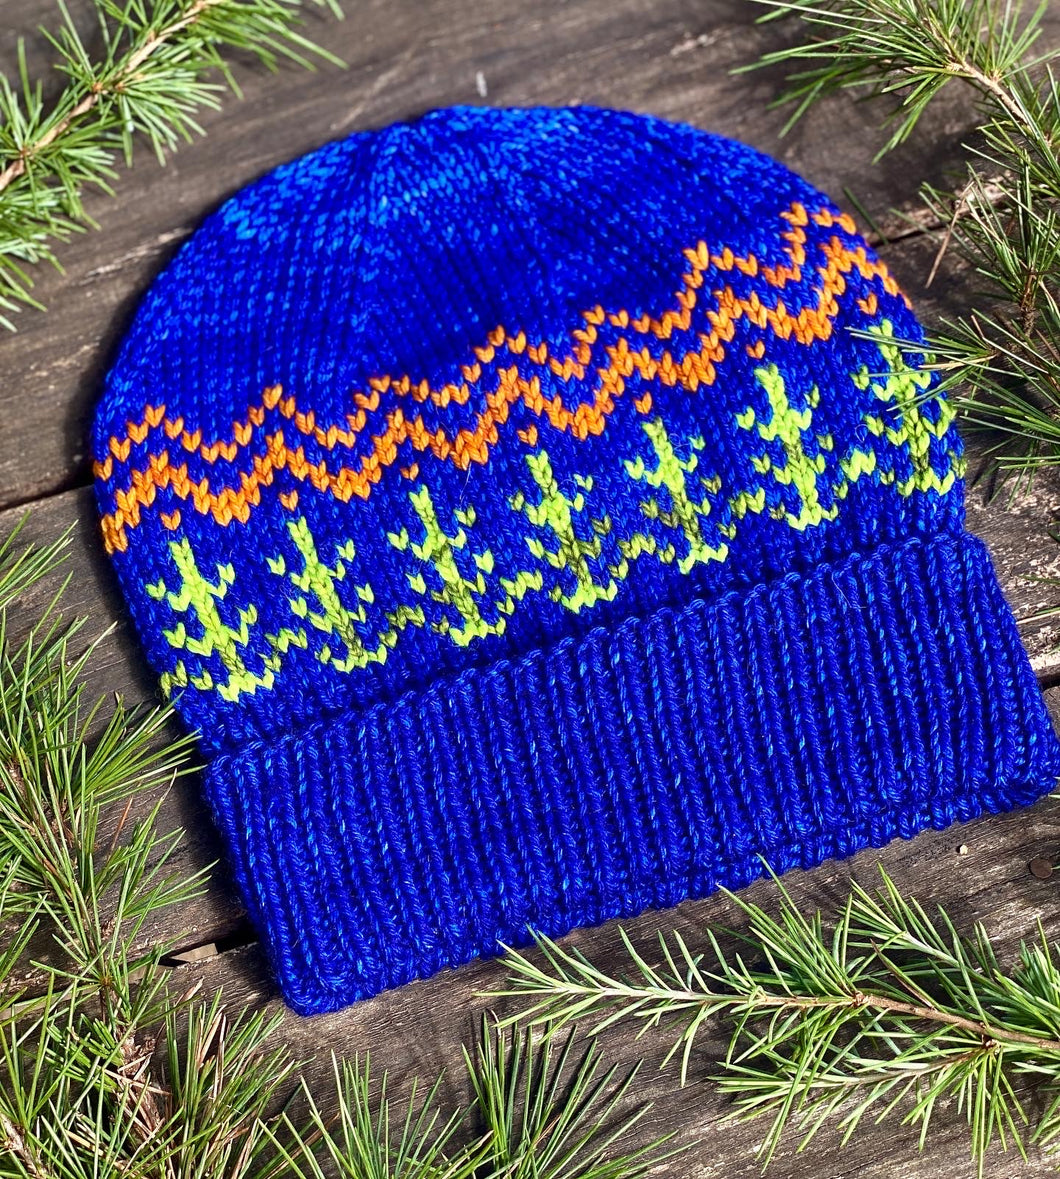 Hand knit merino wool unisex mens womens winter hat beanie mountains trees forest